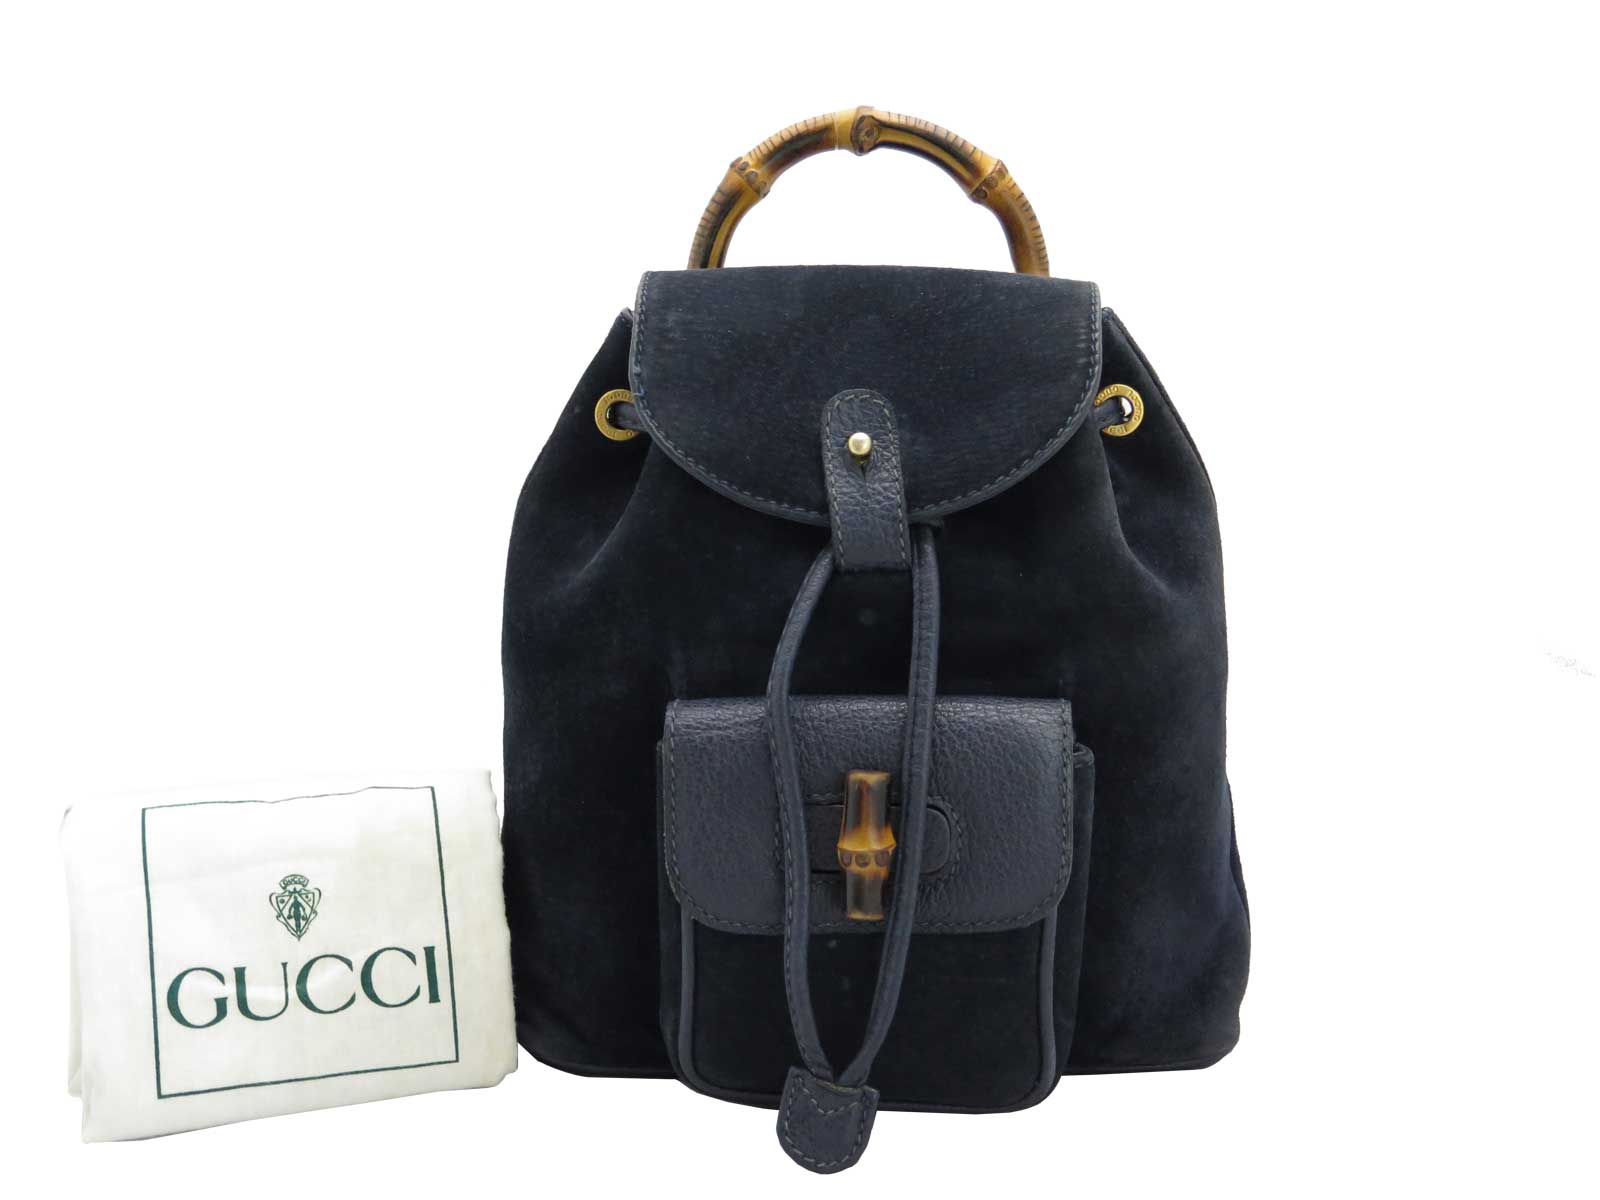 Auth GUCCI Bamboo Mini Drawstring Backpack Navy Suede/Leather Goldtone - e10698 | eBay